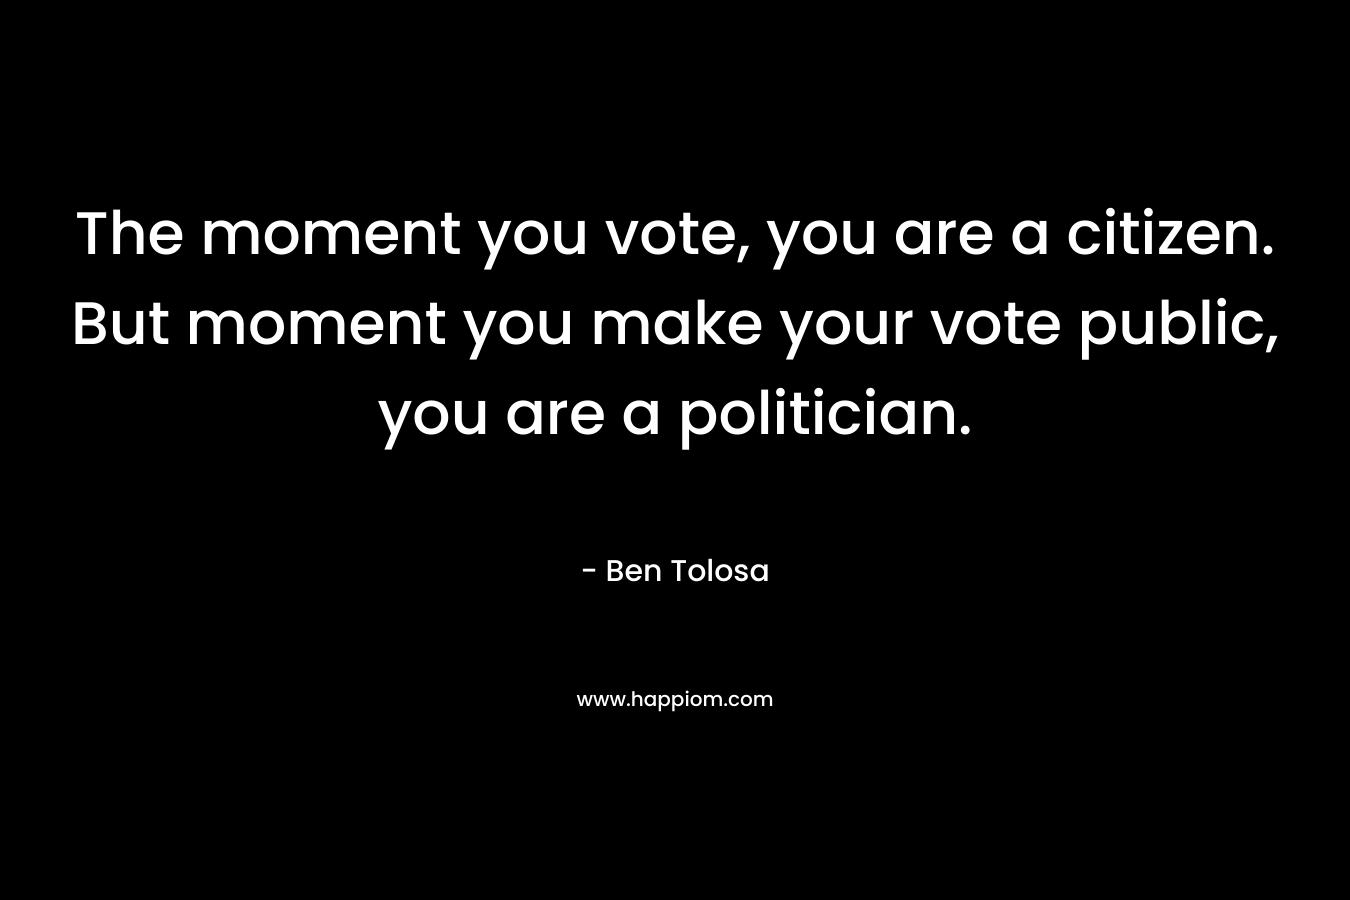 The moment you vote, you are a citizen. But moment you make your vote public, you are a politician.